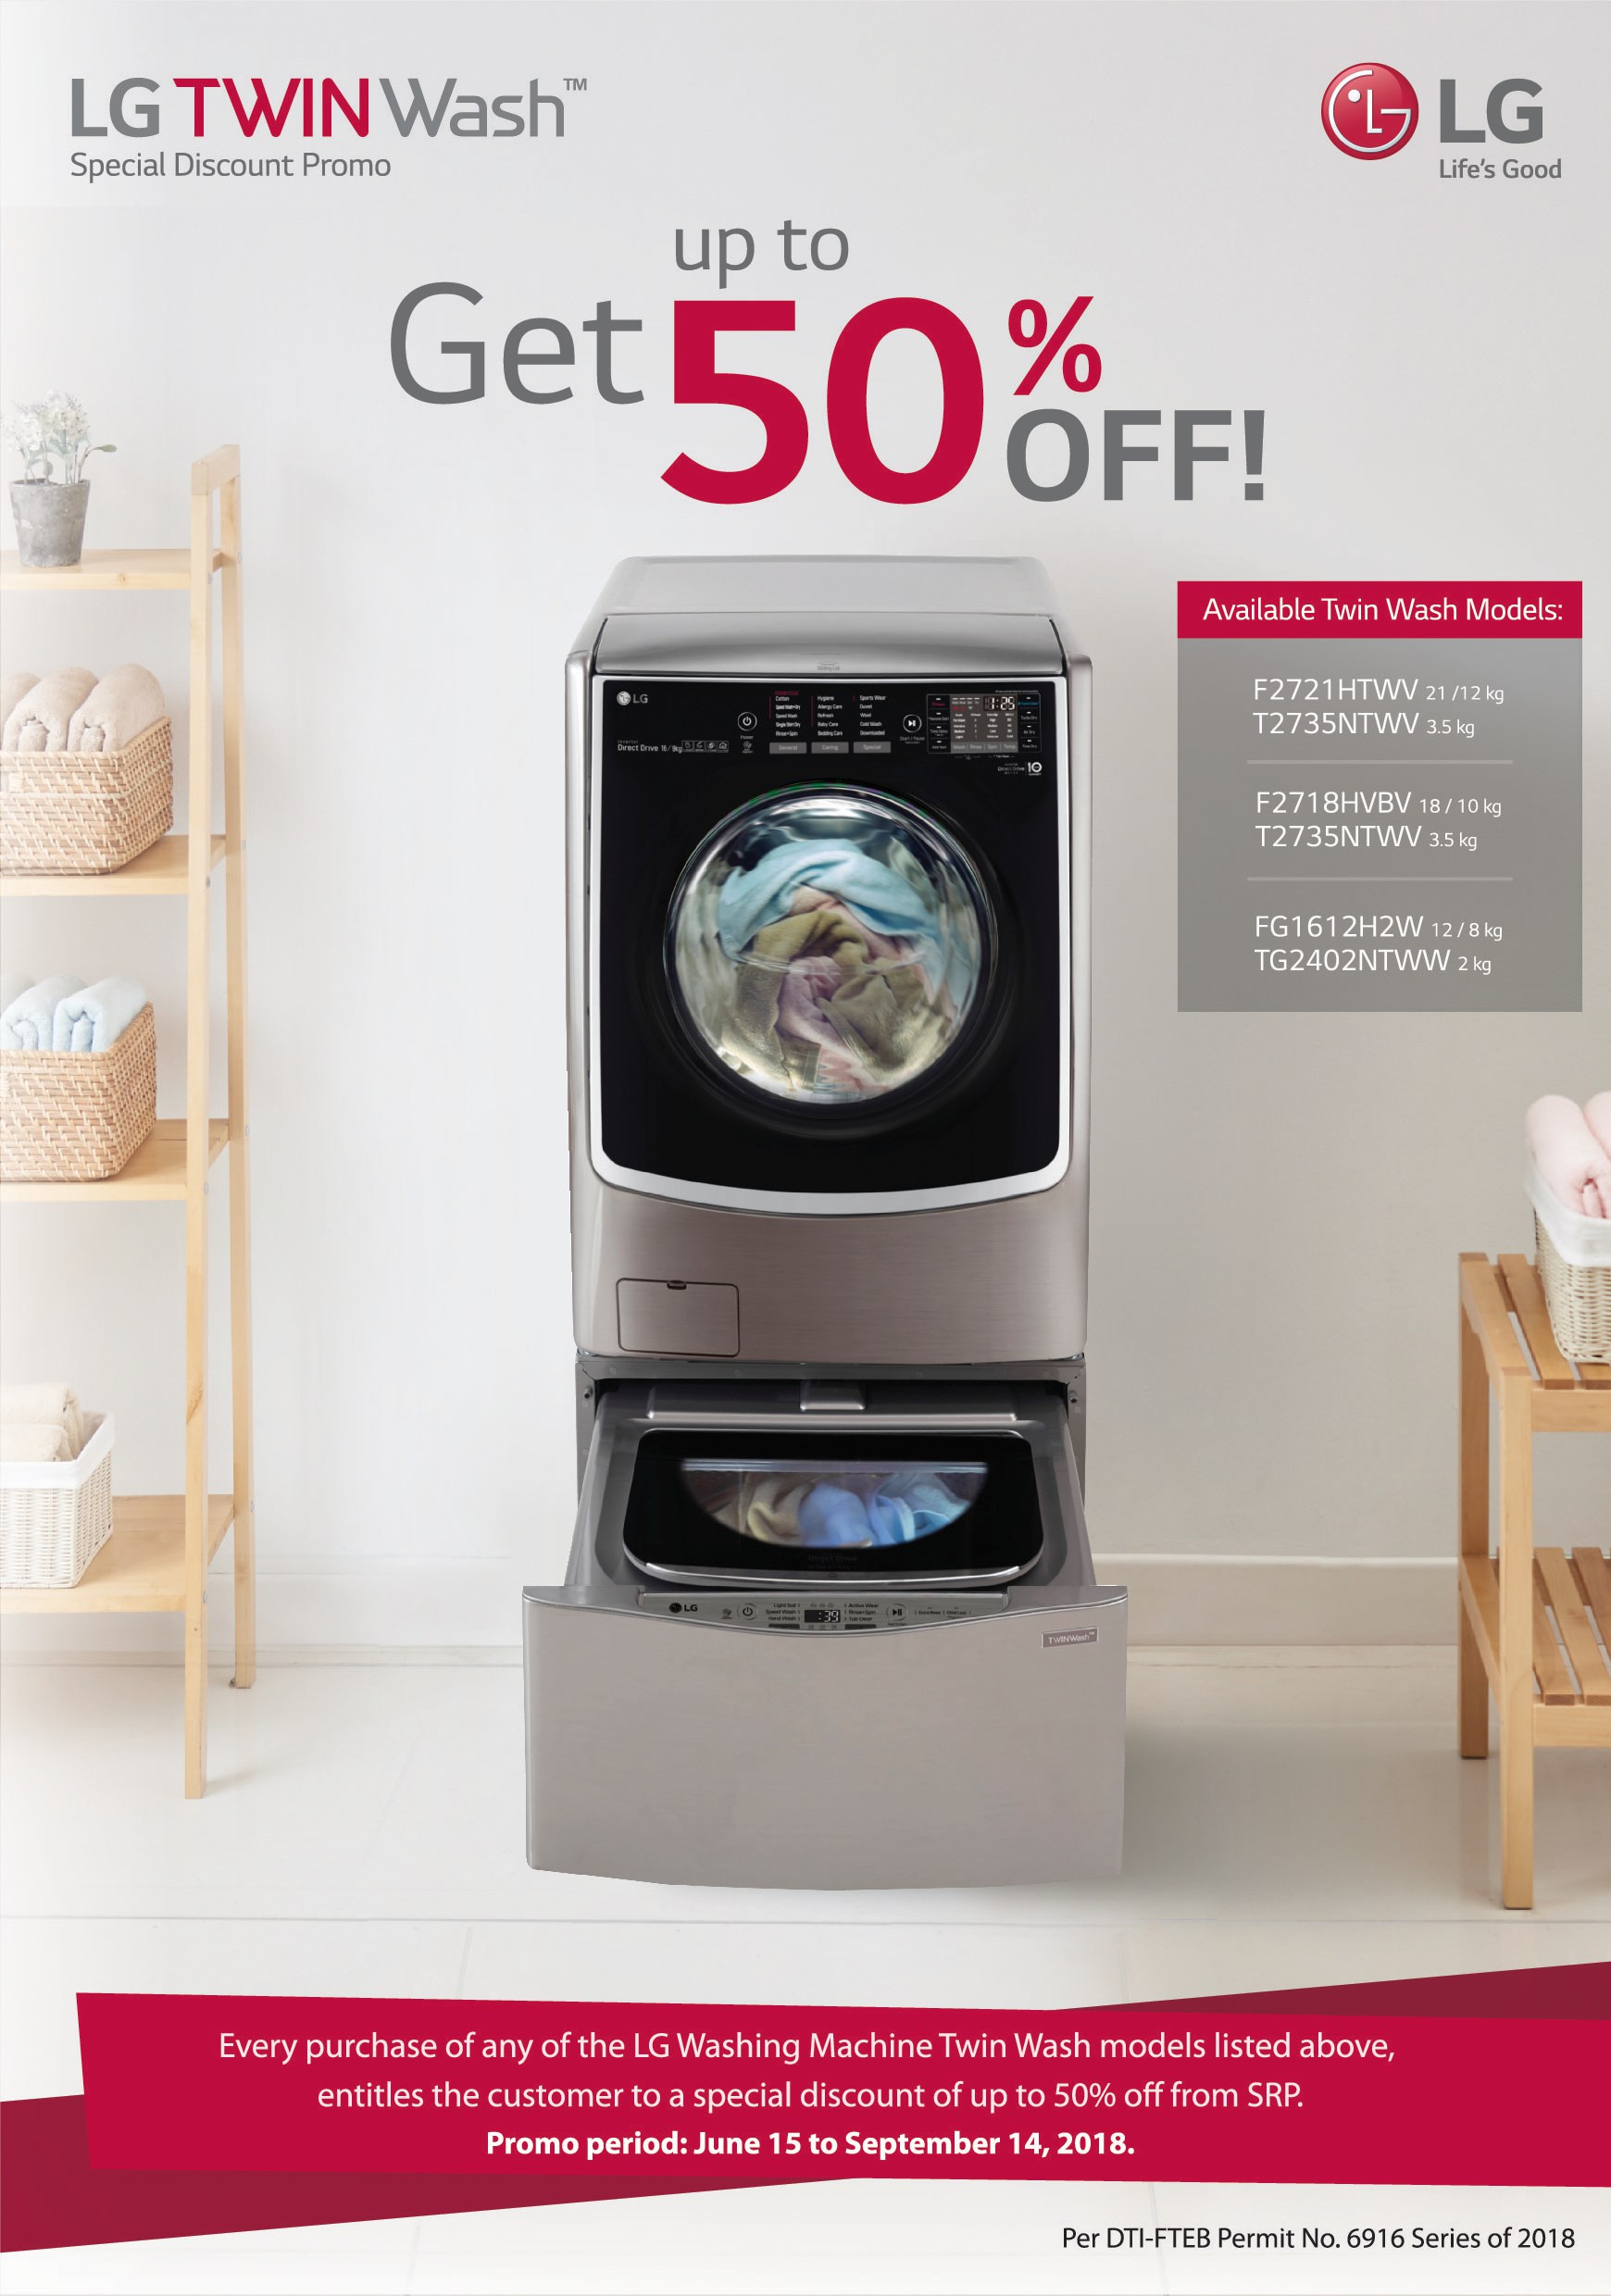 Save time, energy and up to 50 percent when you buy an LG TWINWash washing machine